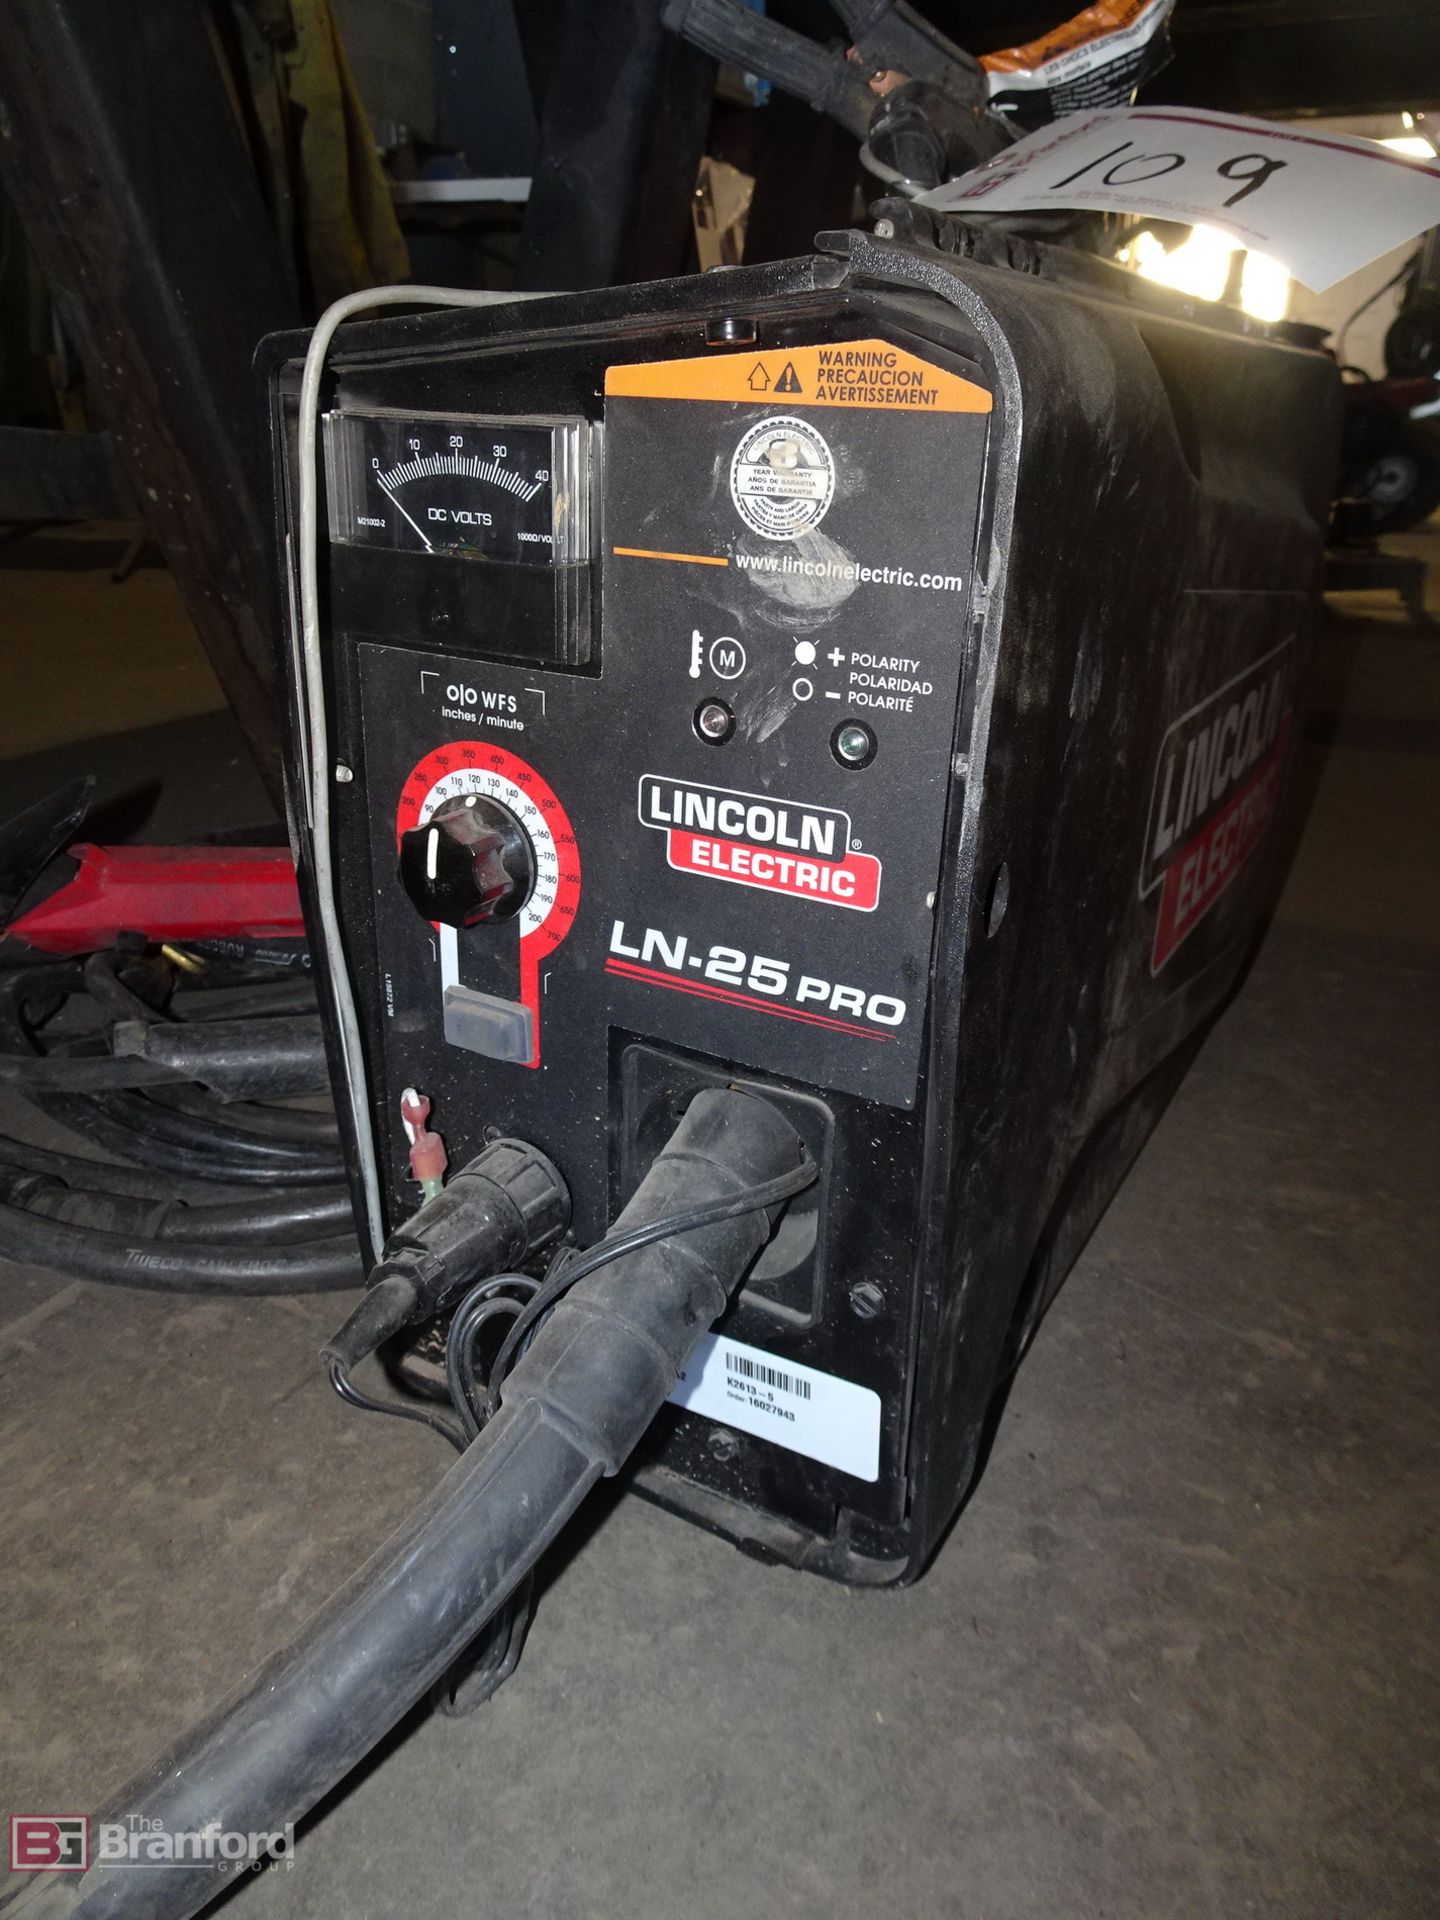 Lincoln Electric Model LN-25 Pro, Hand Carry Welding System - Image 2 of 3